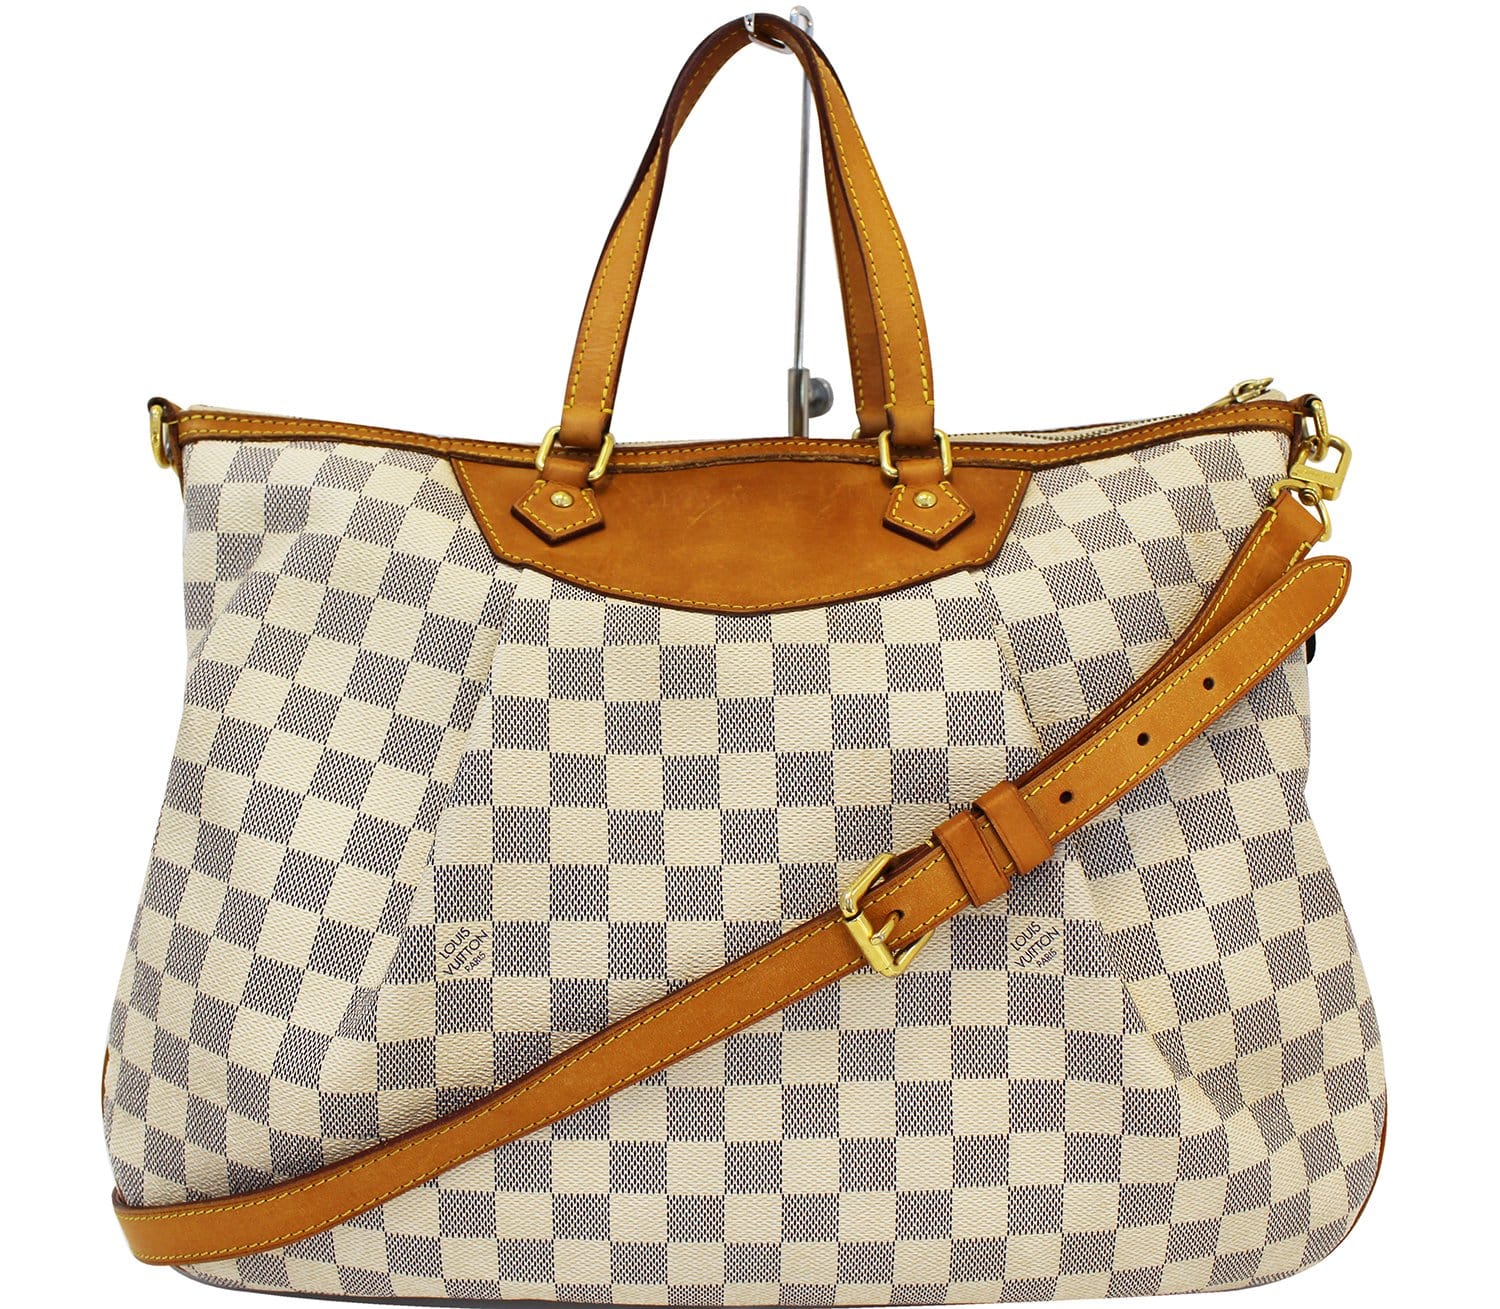 SOLD. Louis Vuitton Damier Azur Siracusa GM Bag. Very good condition. With  long strap and dust bag.